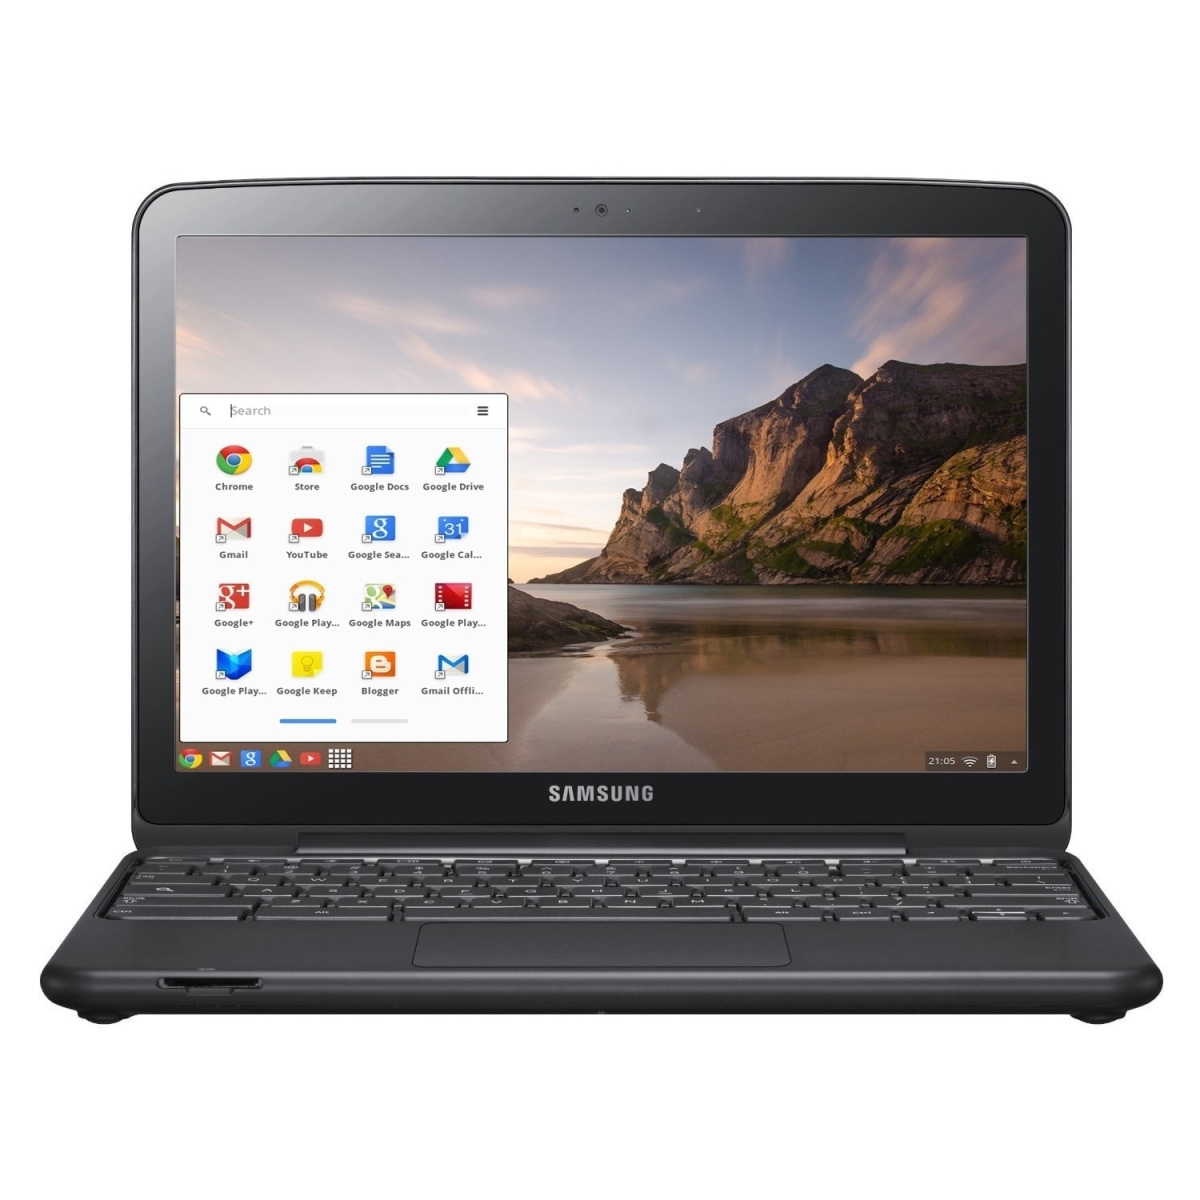 Samsung Chromebook 5 Series XE500C21 front